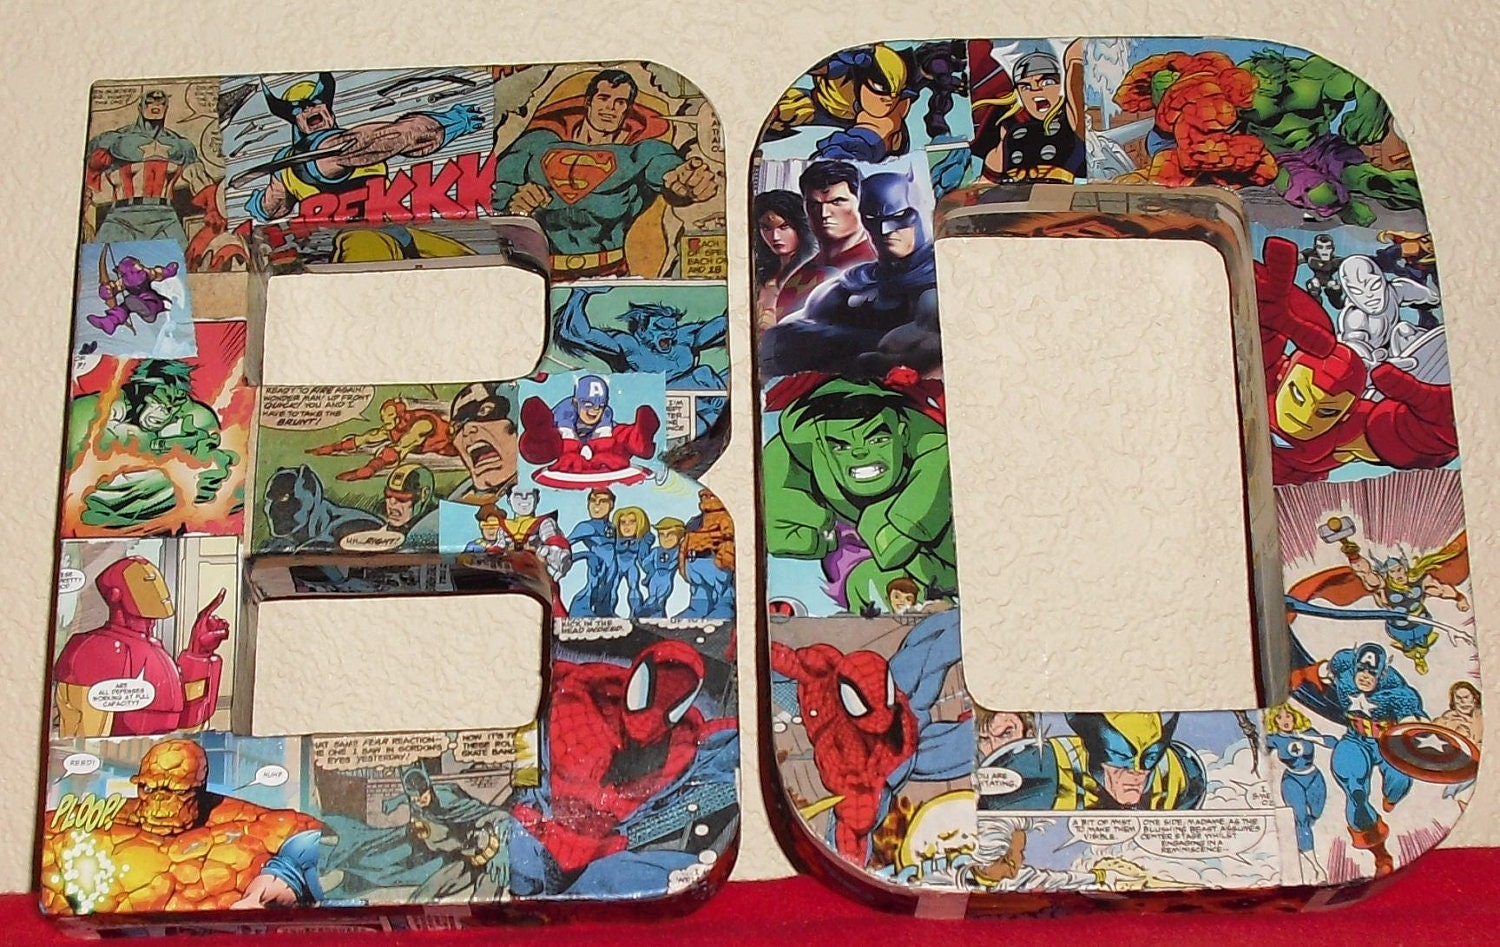 RESERVED LISTING Made to Order Comic Book Letters Wall Hangers Avengers, Spiderman, Thor, Batman, Superman, XMEN